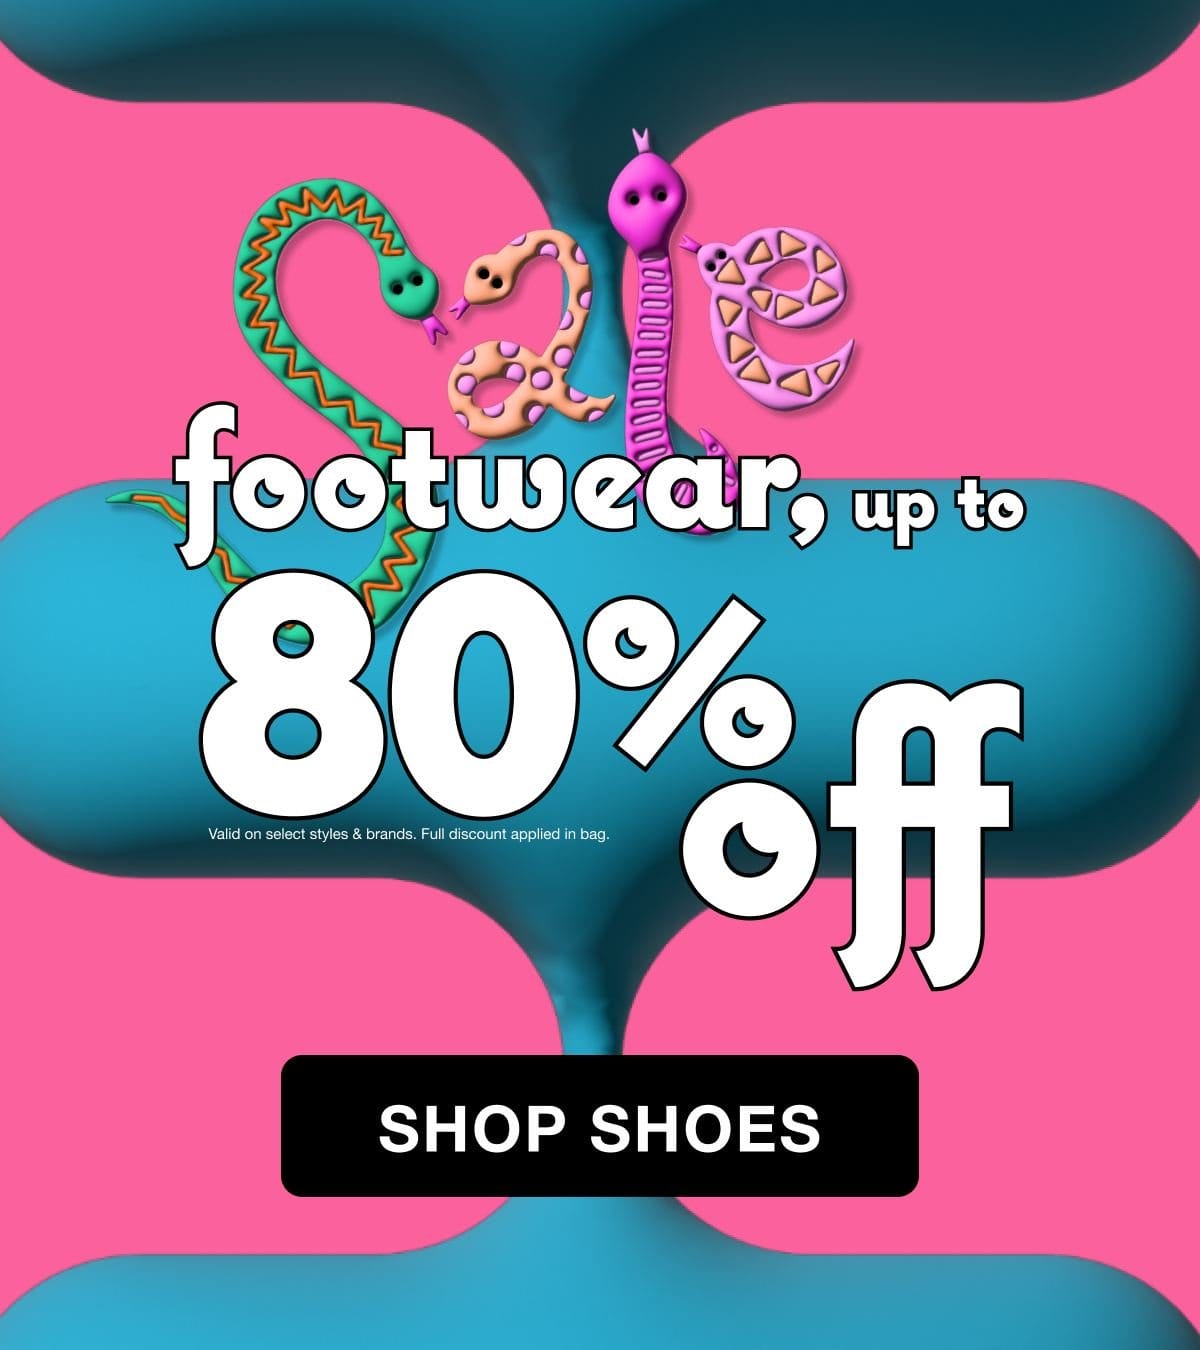 Get Up to 80% Off Footwear | SHOP 5-DAY SALE